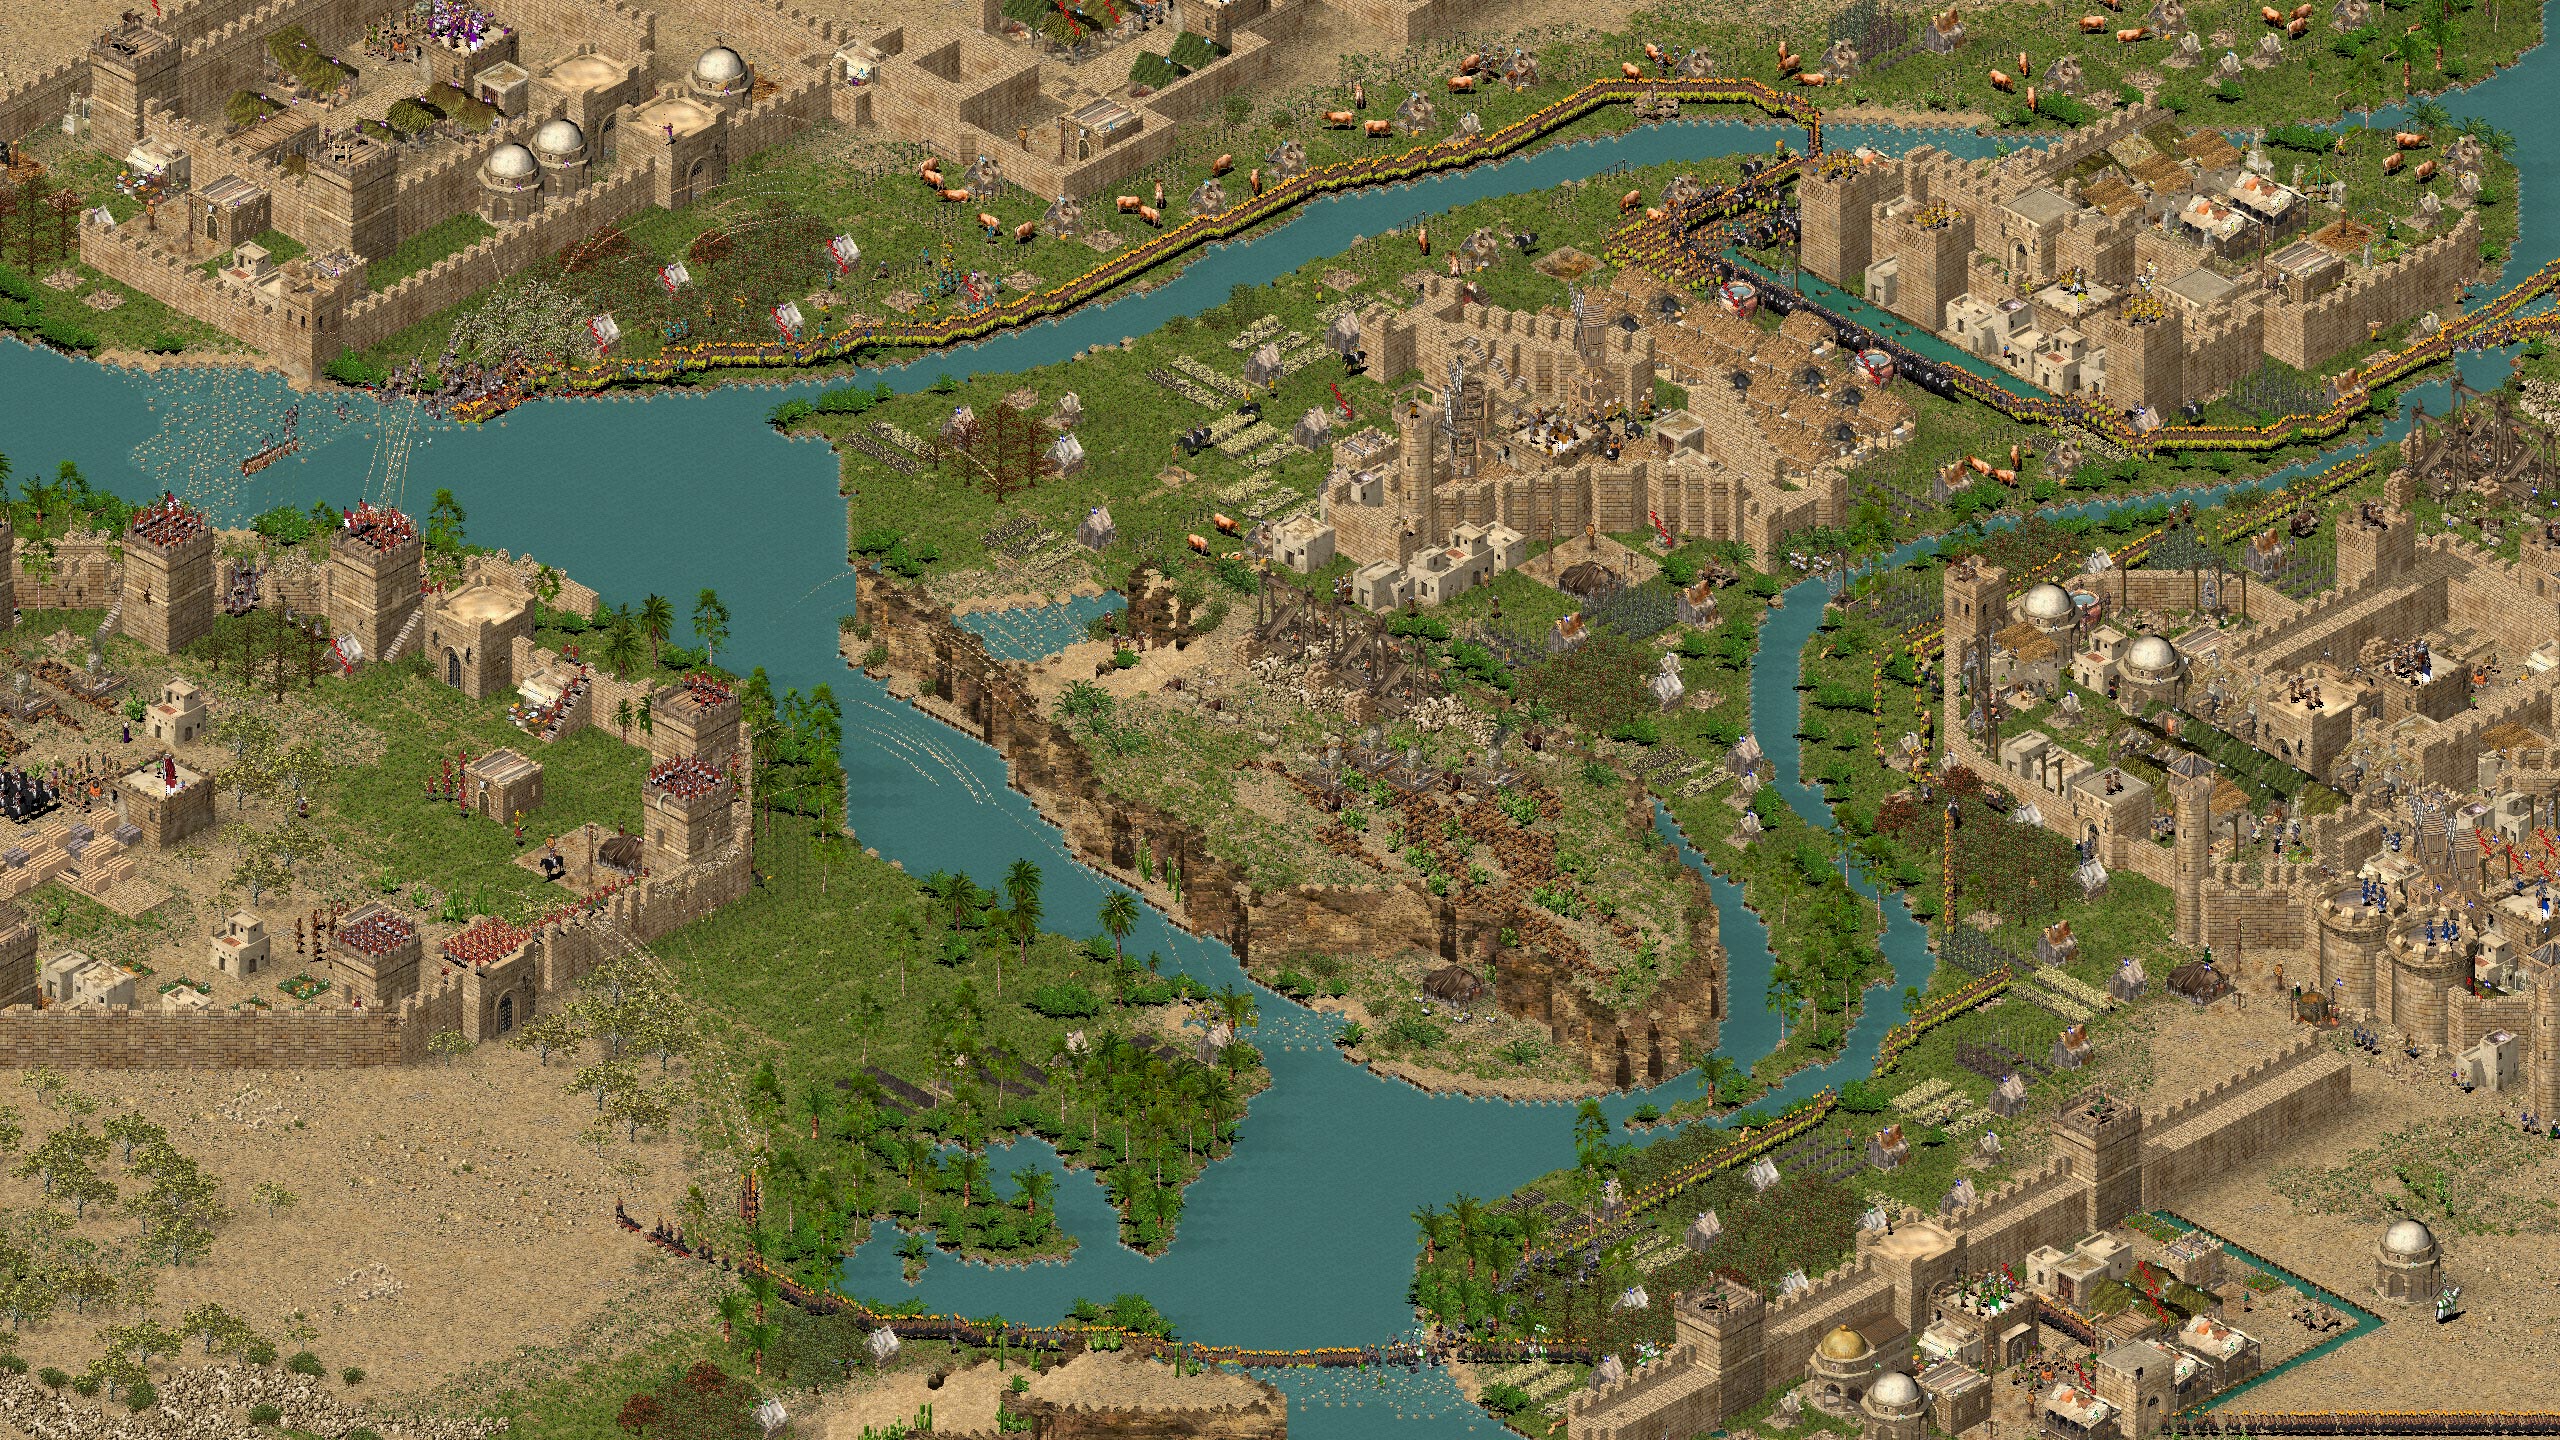 stronghold crusader extreme download full game free